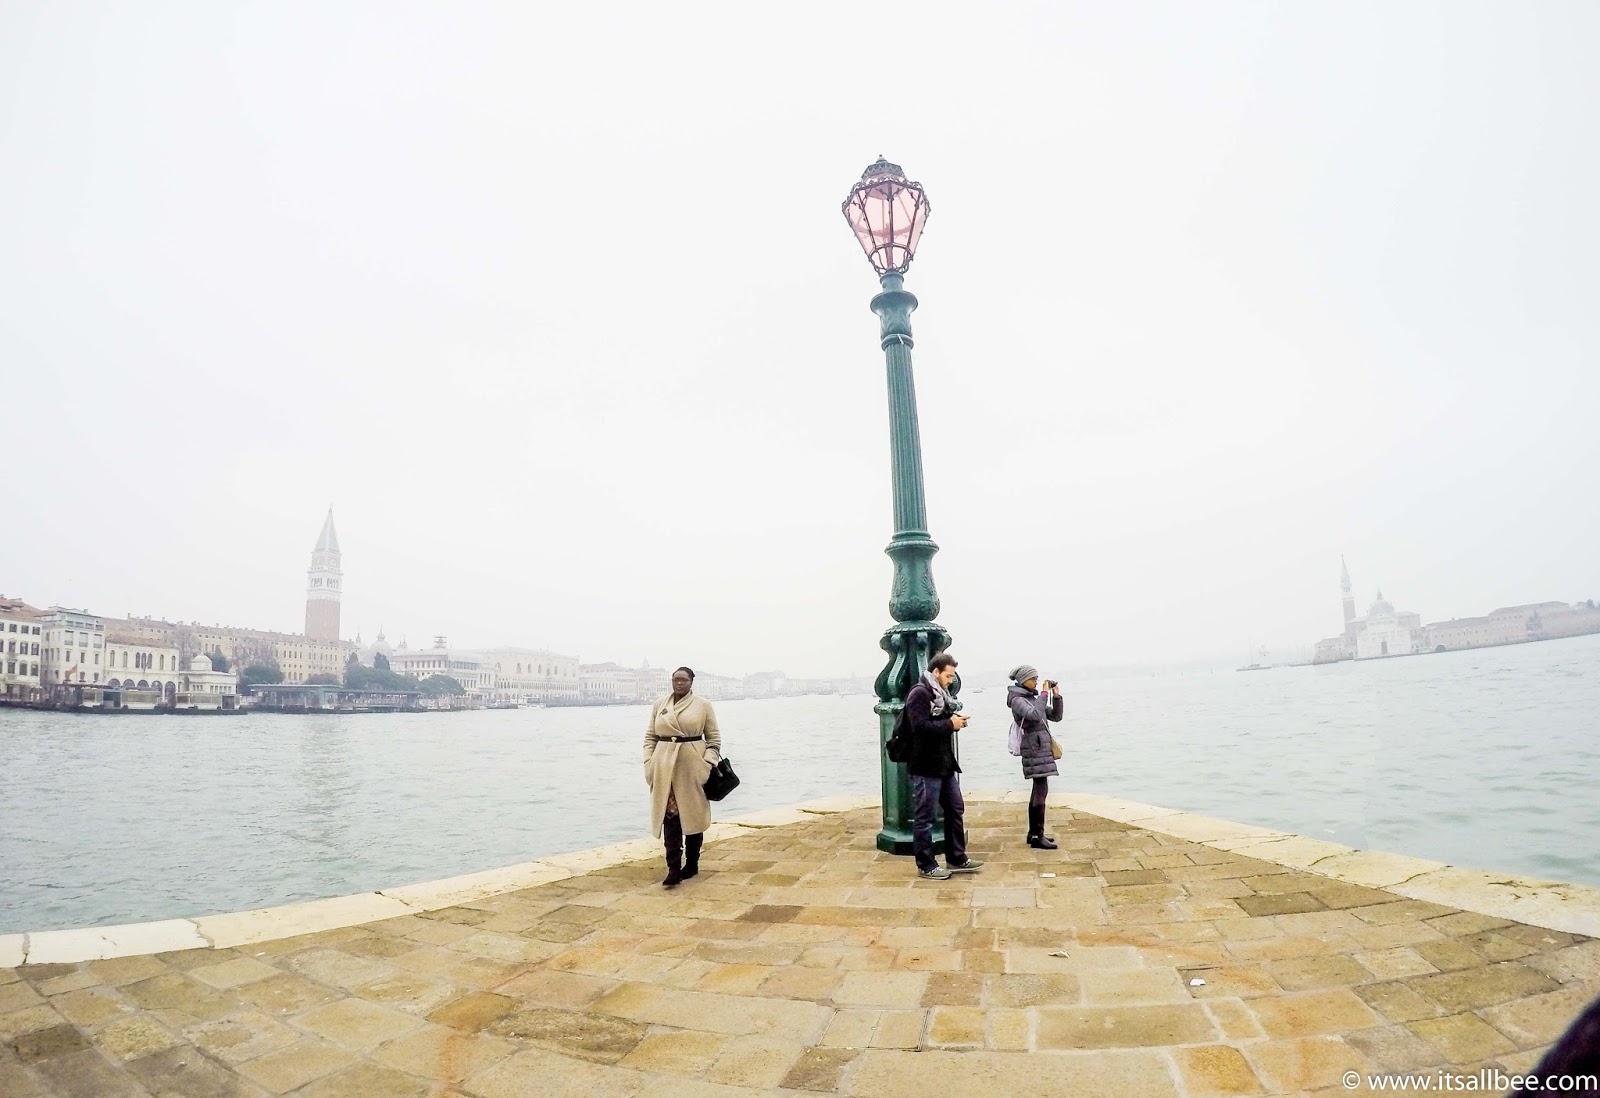 Venice on a Budget | 5 Travel Tips On Visiting Venice on a Budget ...